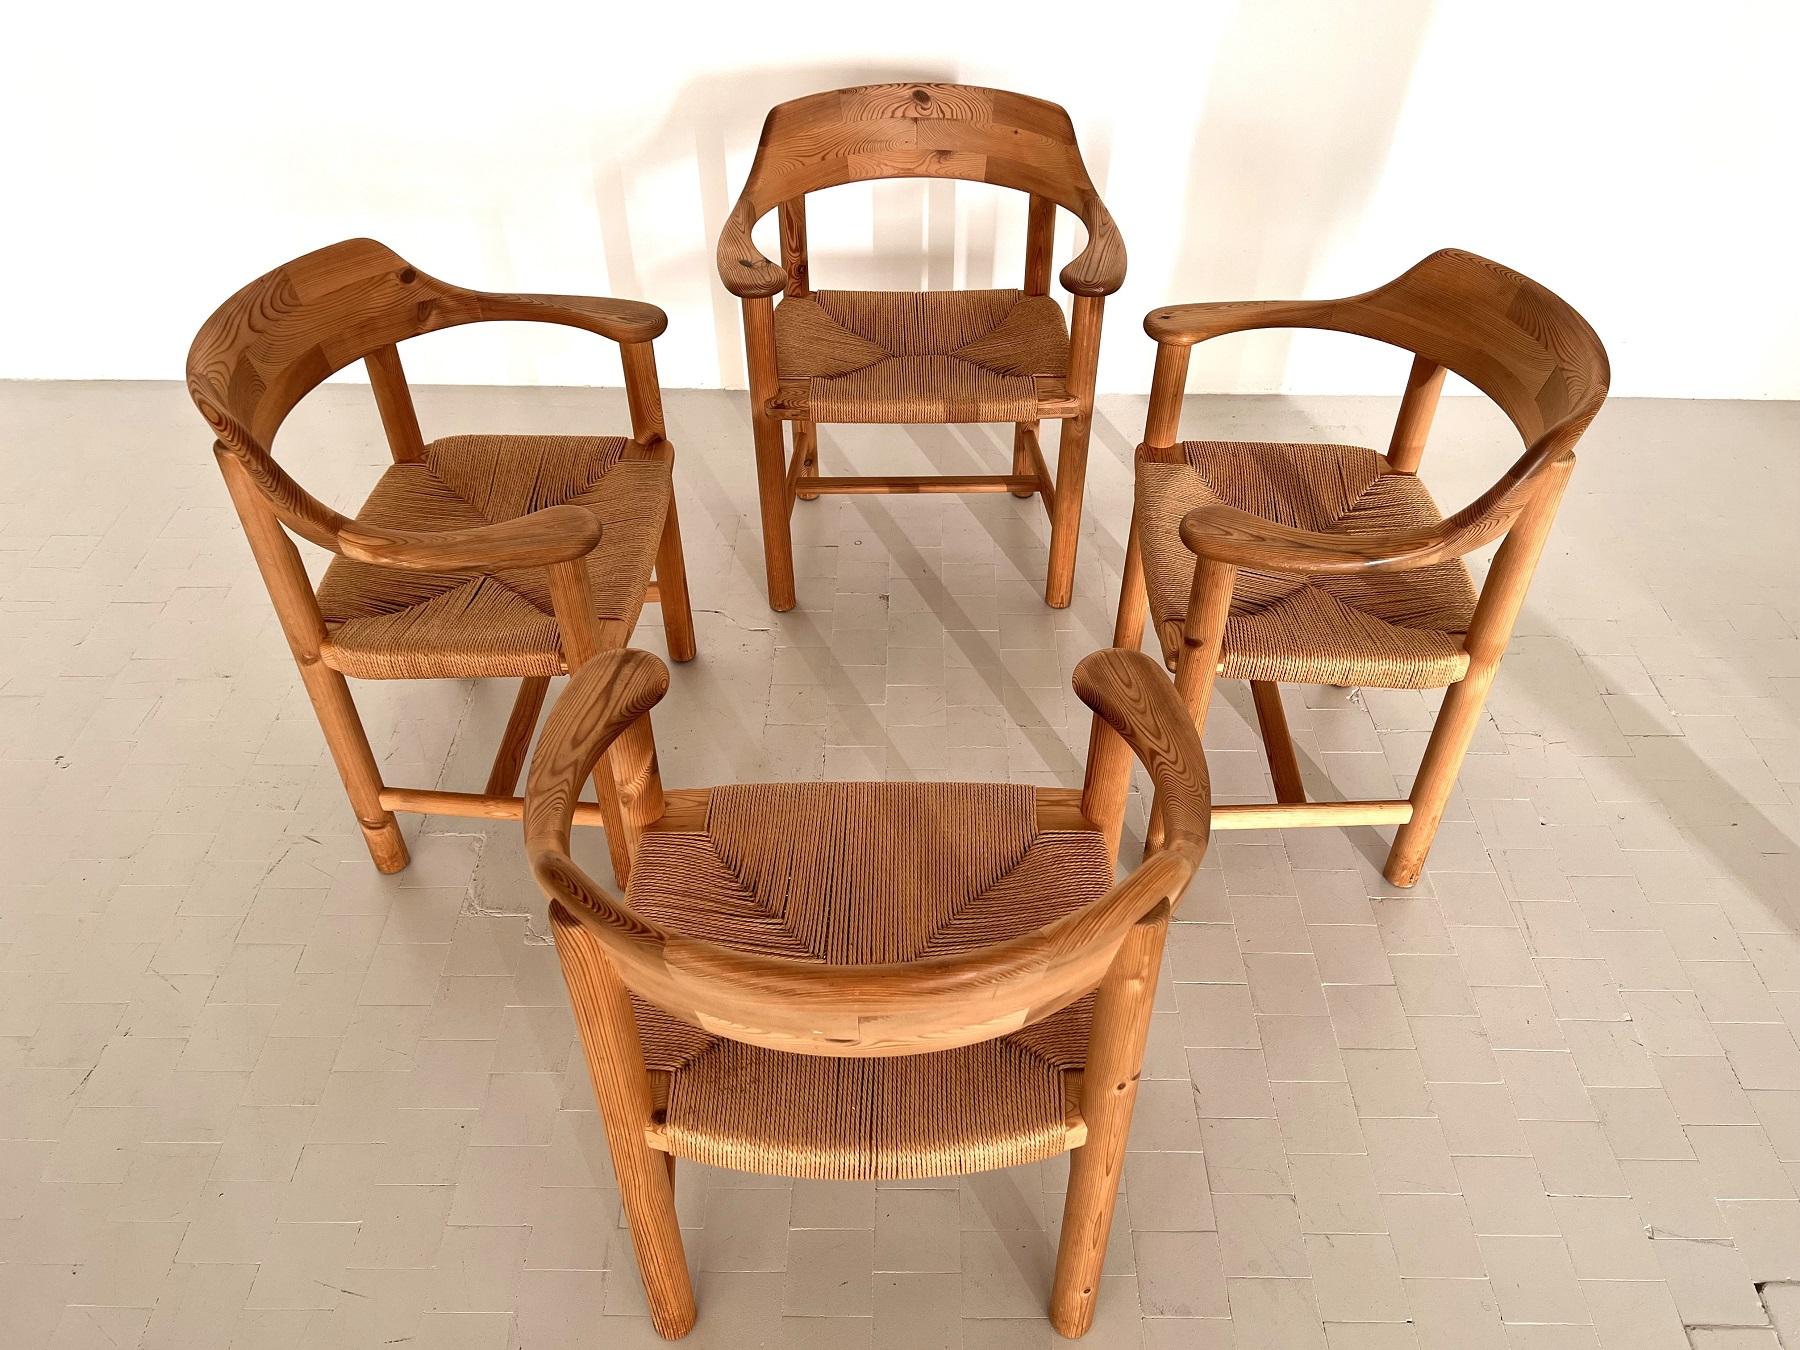 Rainer Daumiller Dining Chairs in Pine and Paper Cord, 1970s For Sale 3